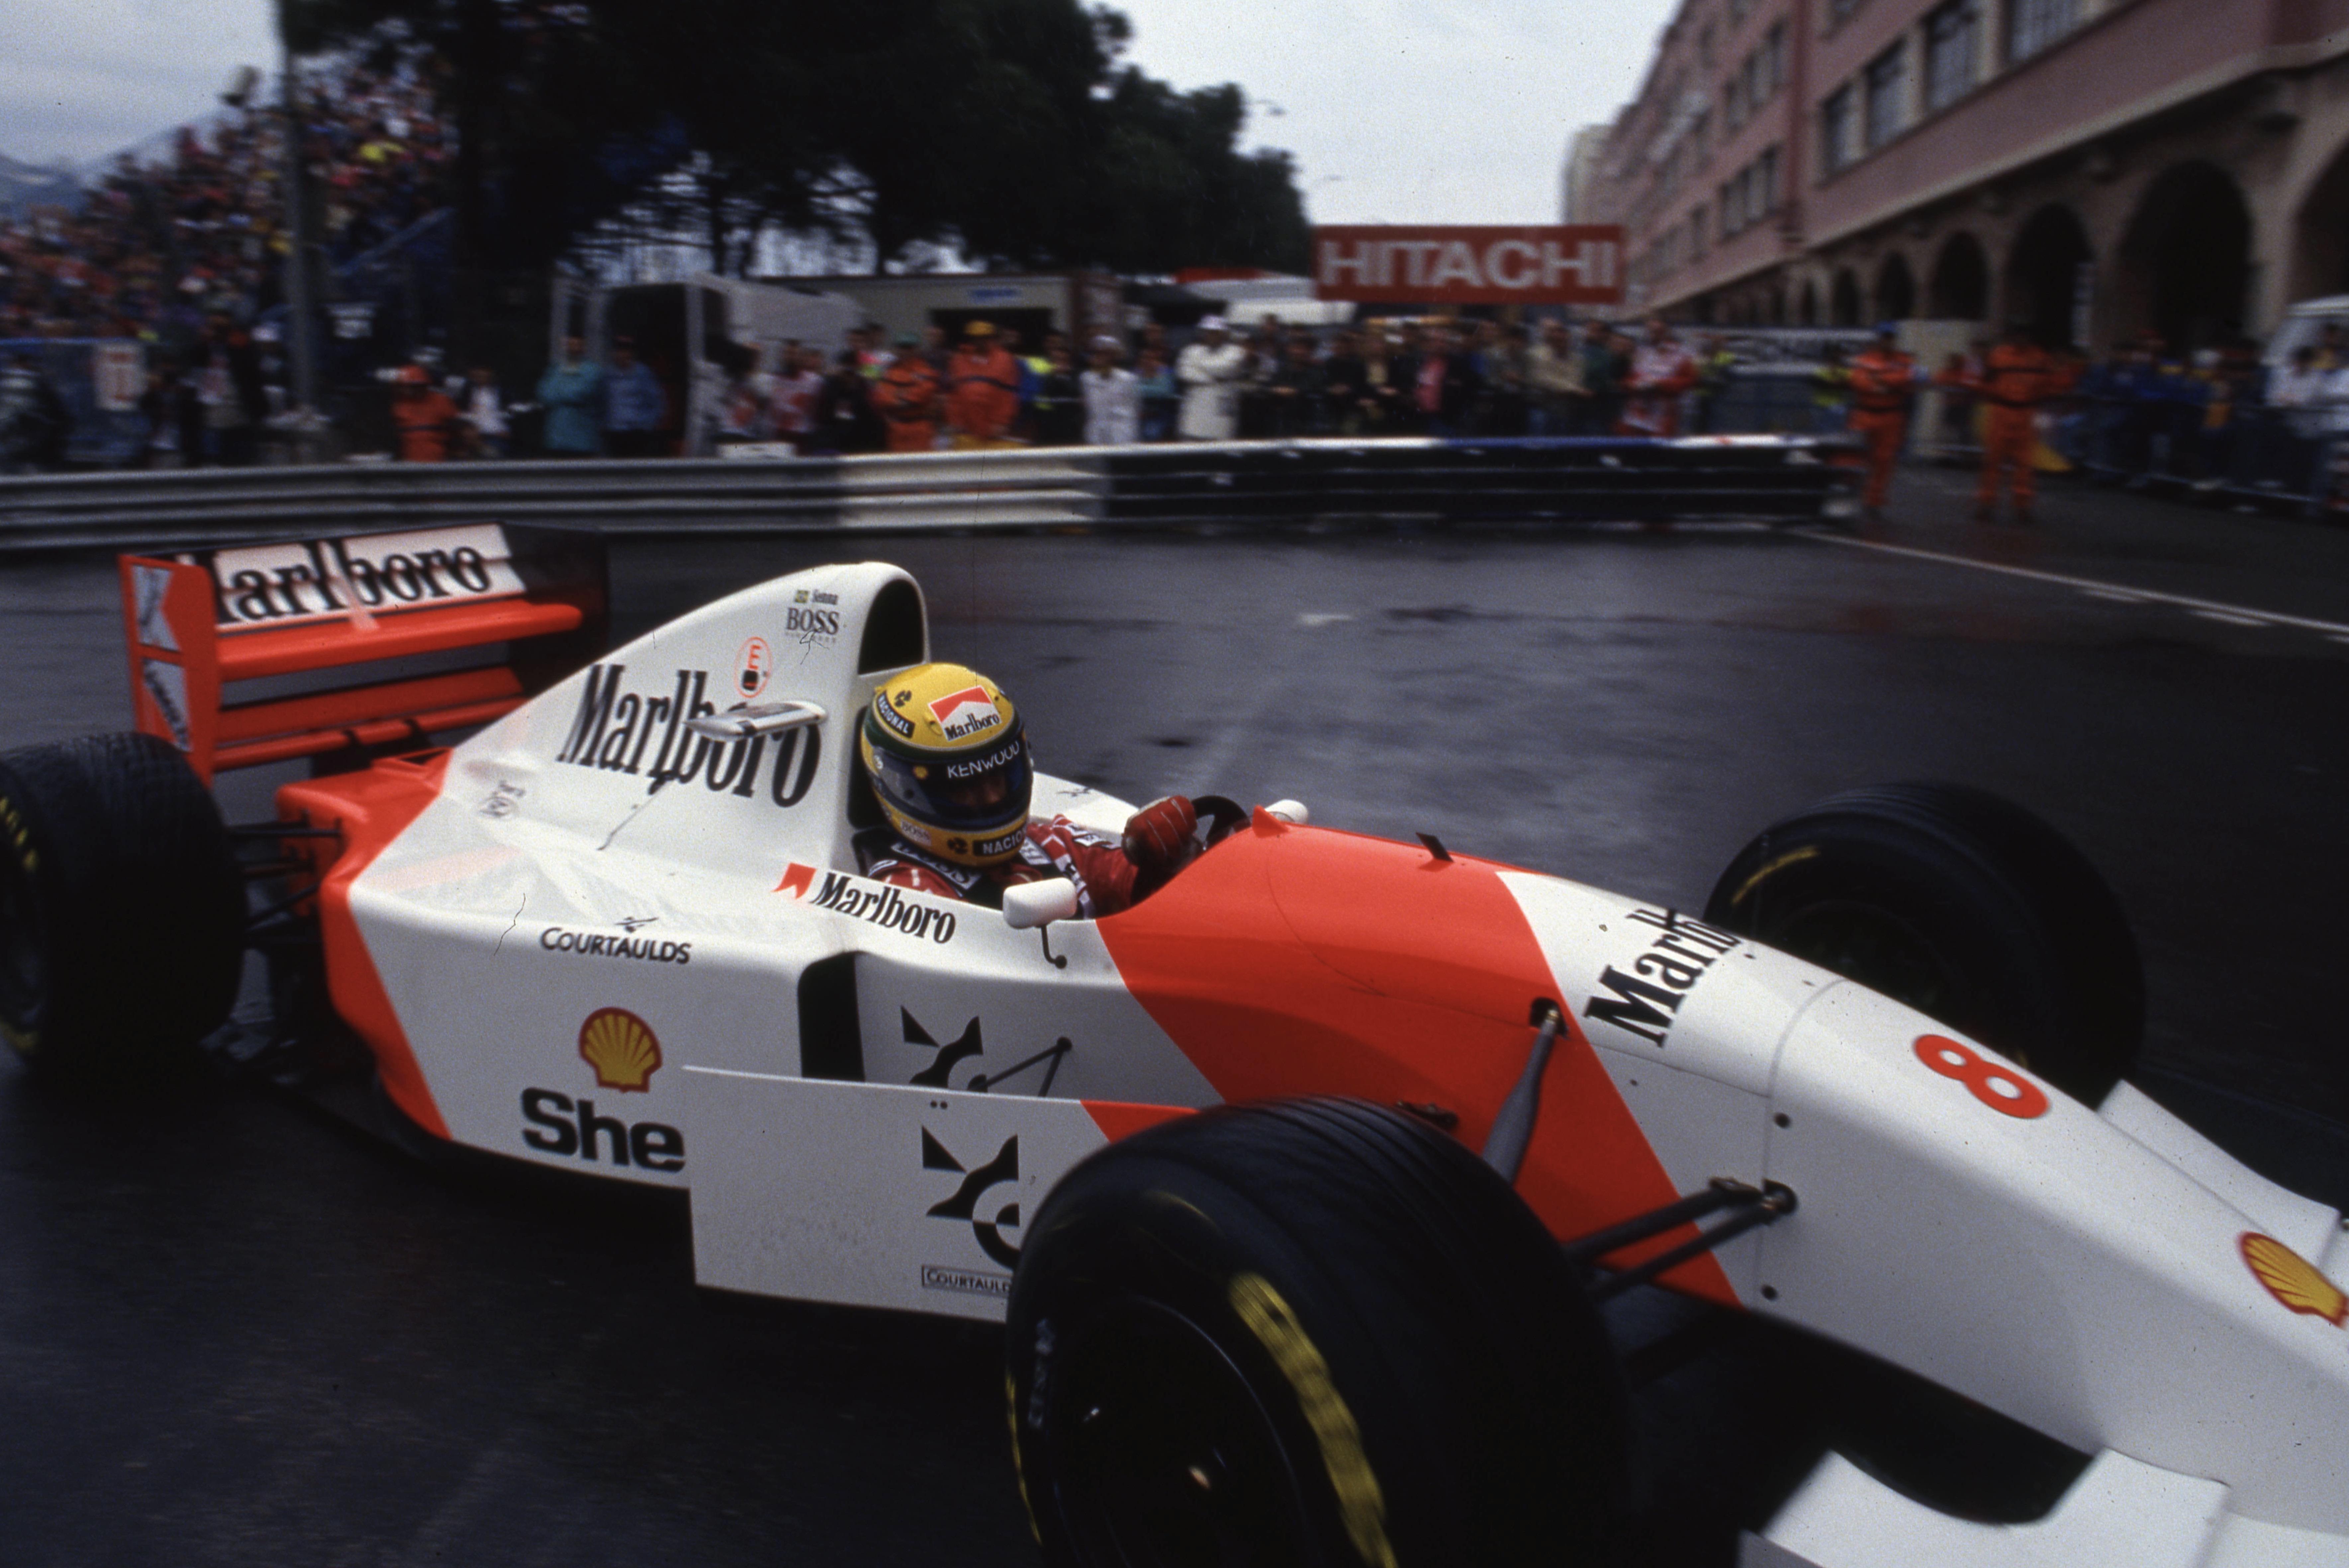 Monaco 4k Wallpapers For Your Desktop Or Mobile Screen Free And Easy To Download